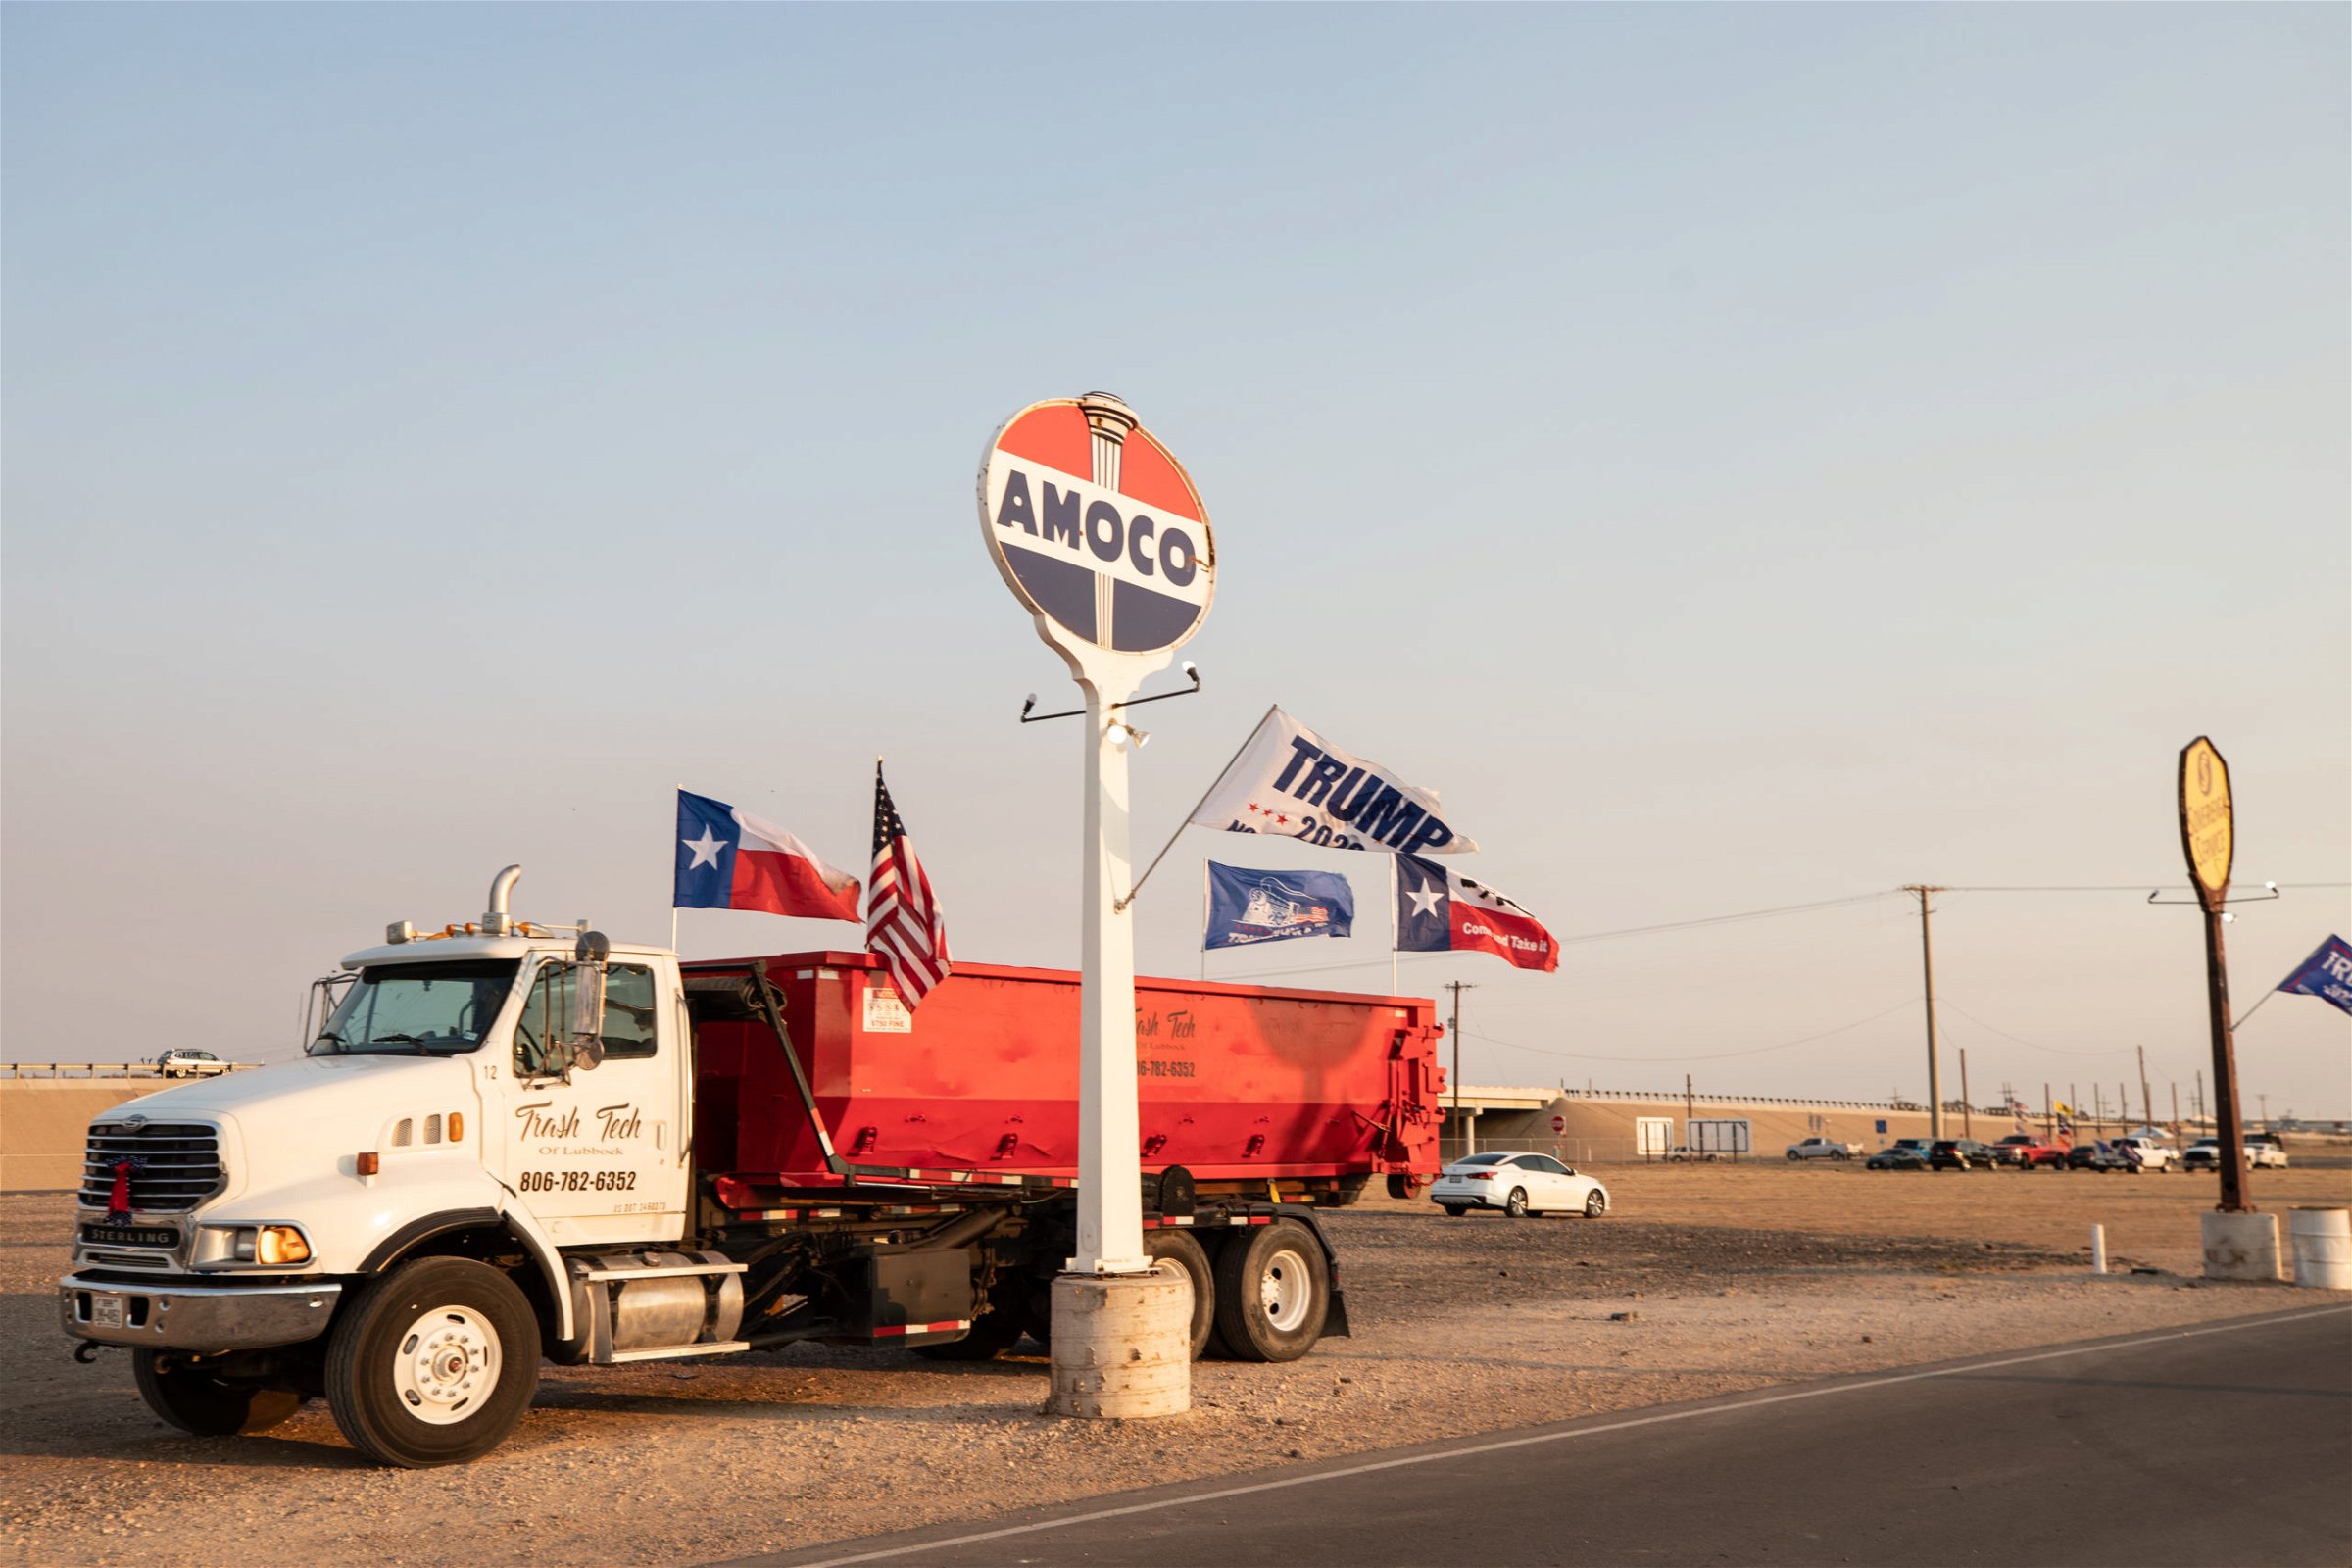 A truck with Texas, American, and "Trump train" flags returned to Cook's Garage after a "Trump Train" car parade in Lubbock, Texas, on Sunday, Oct. 18, 2020. (Kaylee Greenlee - DCNF)